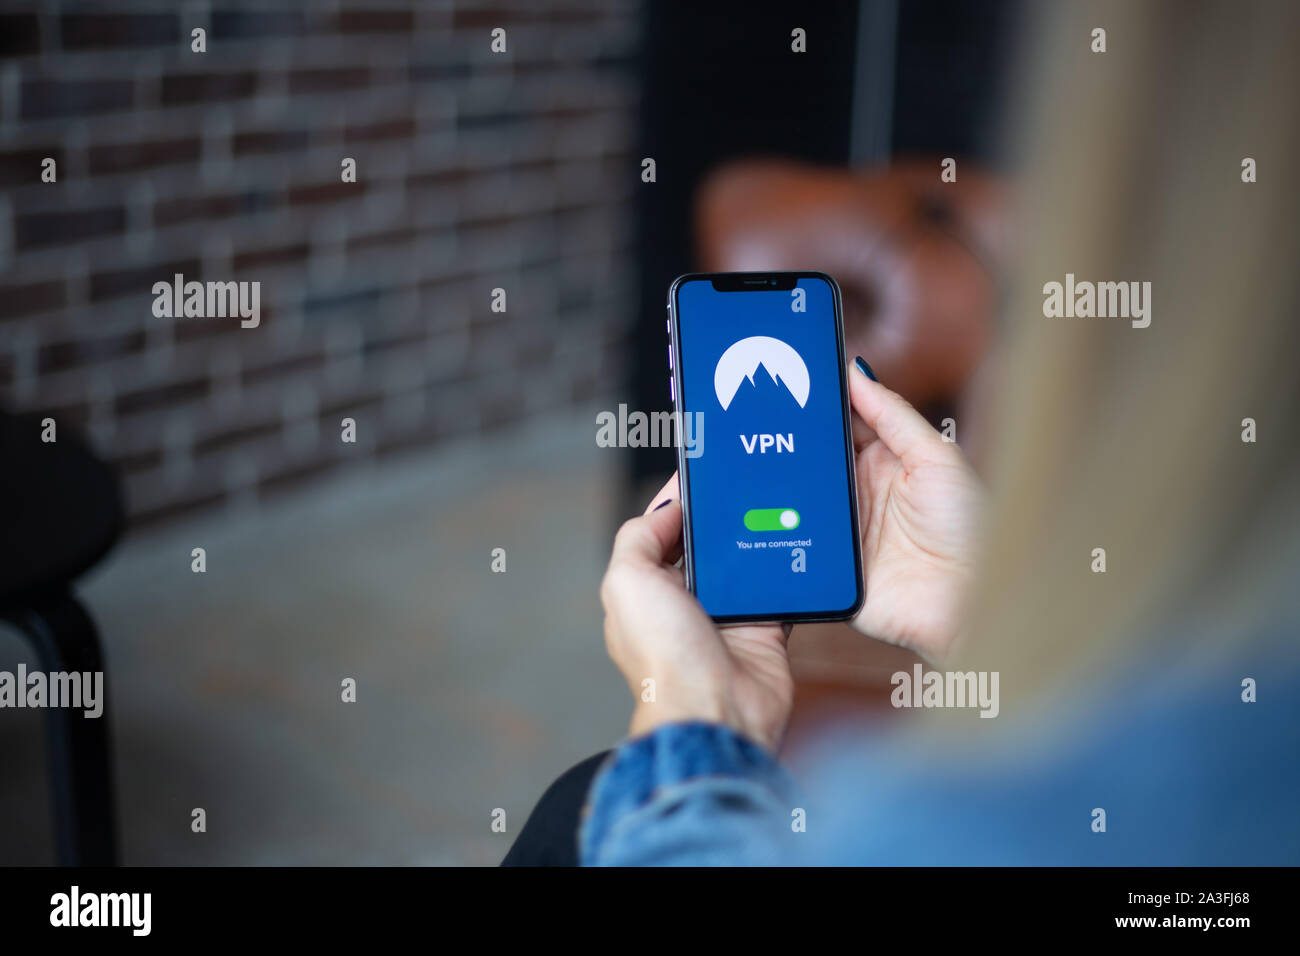 Virtual private network app on the phone Stock Photo